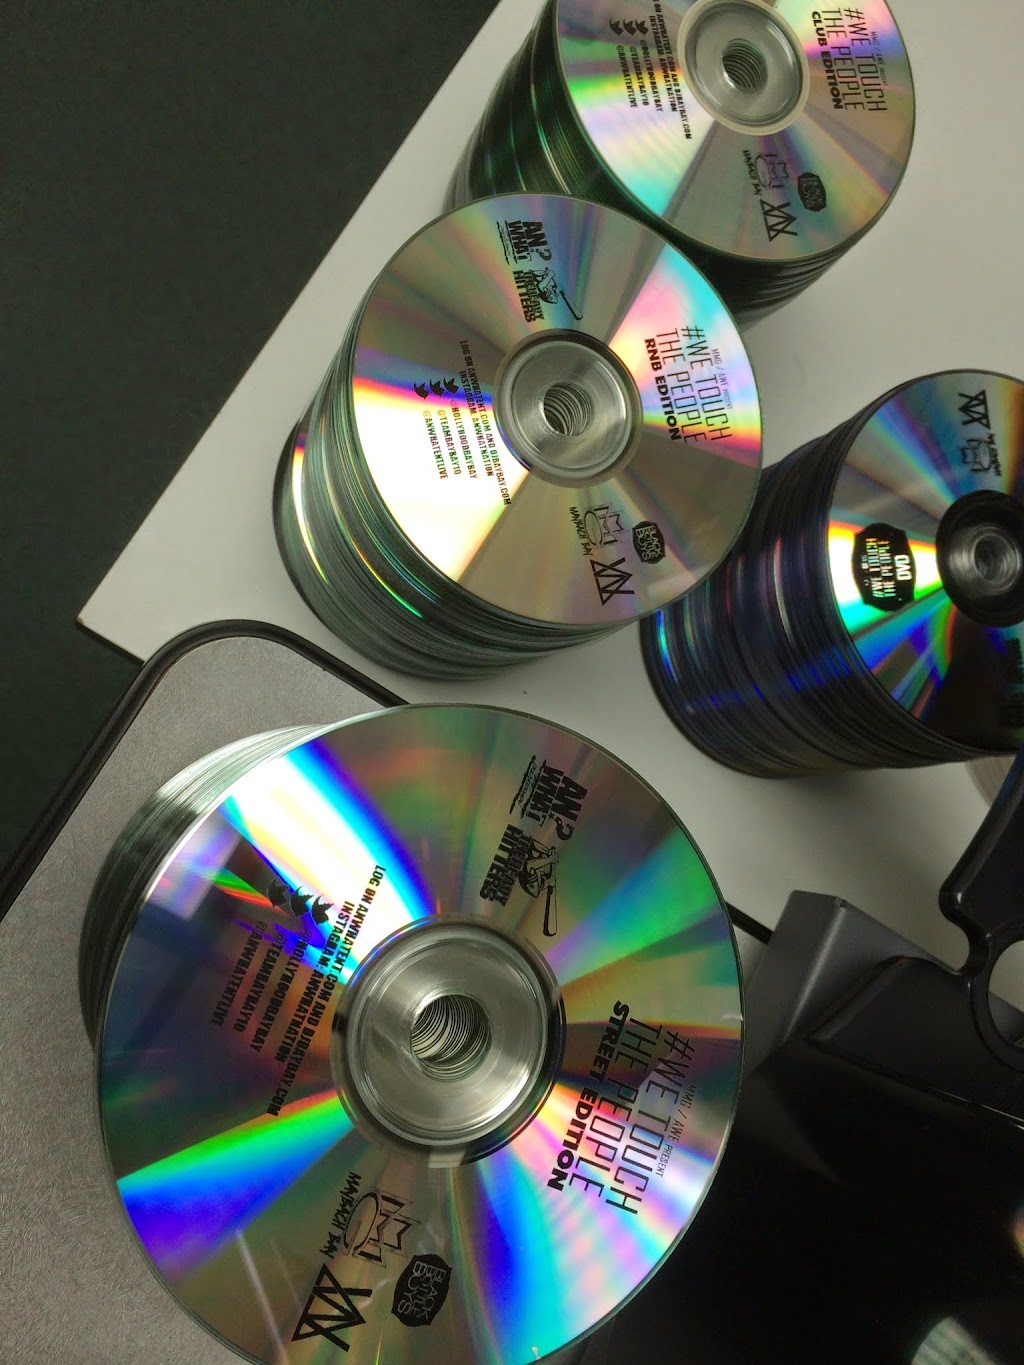 Super Dupe CD/DVD Duplication | 1848 Lone Star Rd Suite 308, Mansfield, TX 76063 | Phone: (817) 987-1104